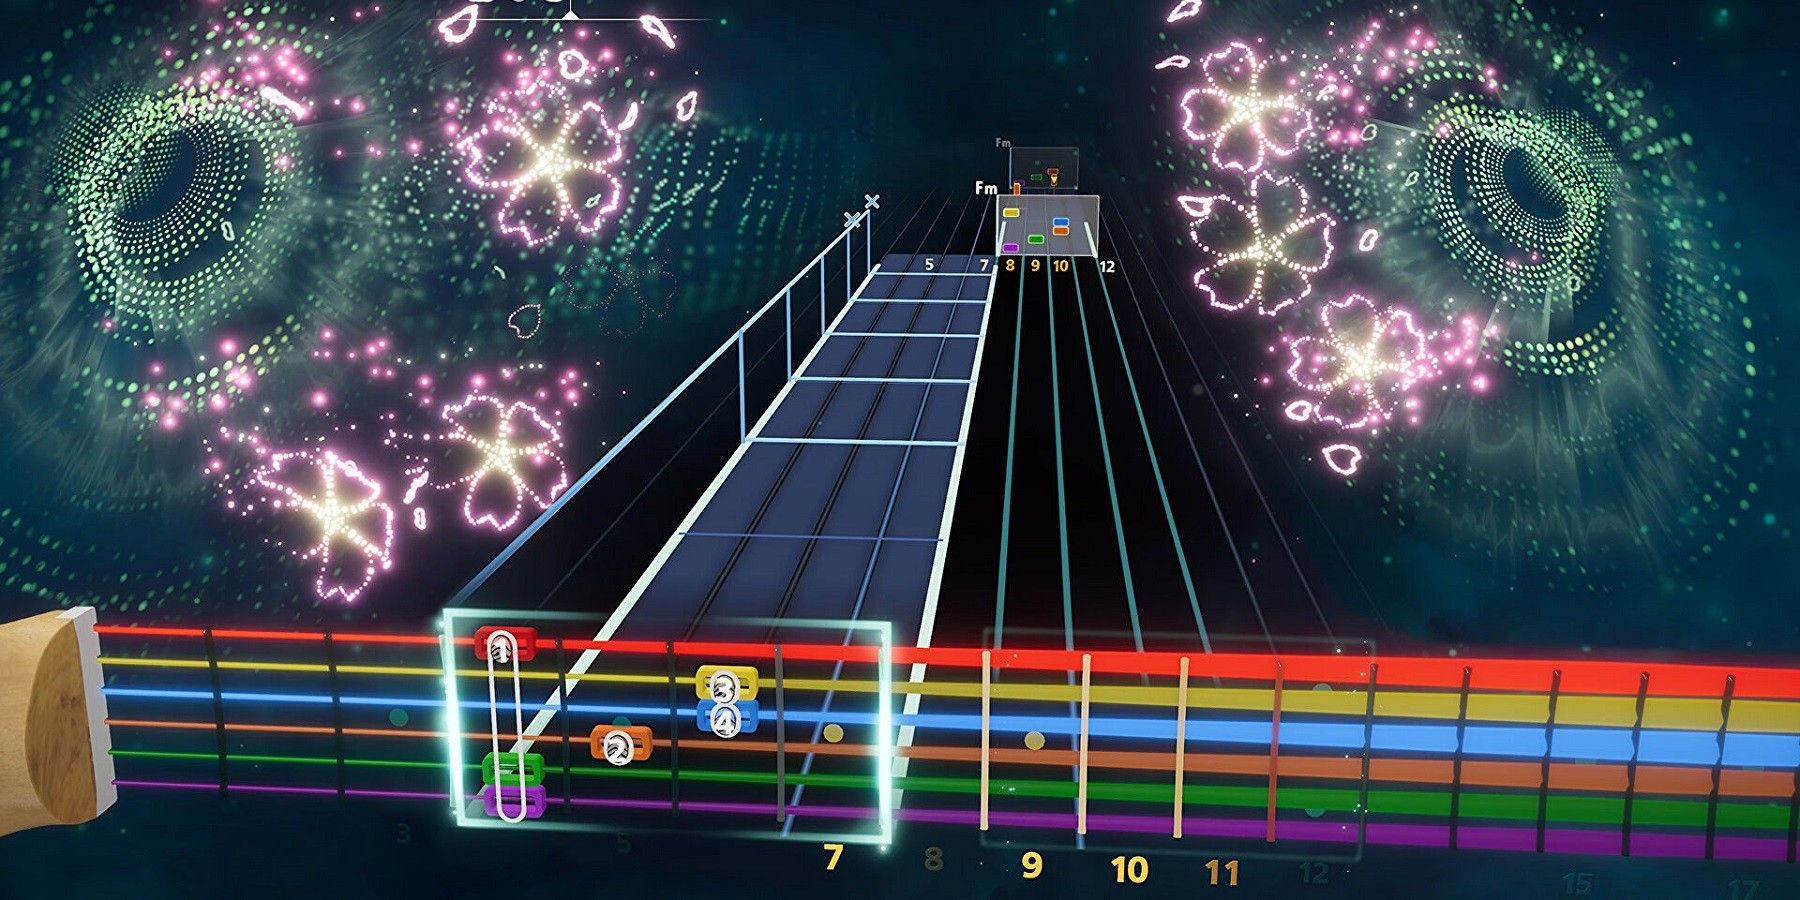 rocksmith guitar learning game 